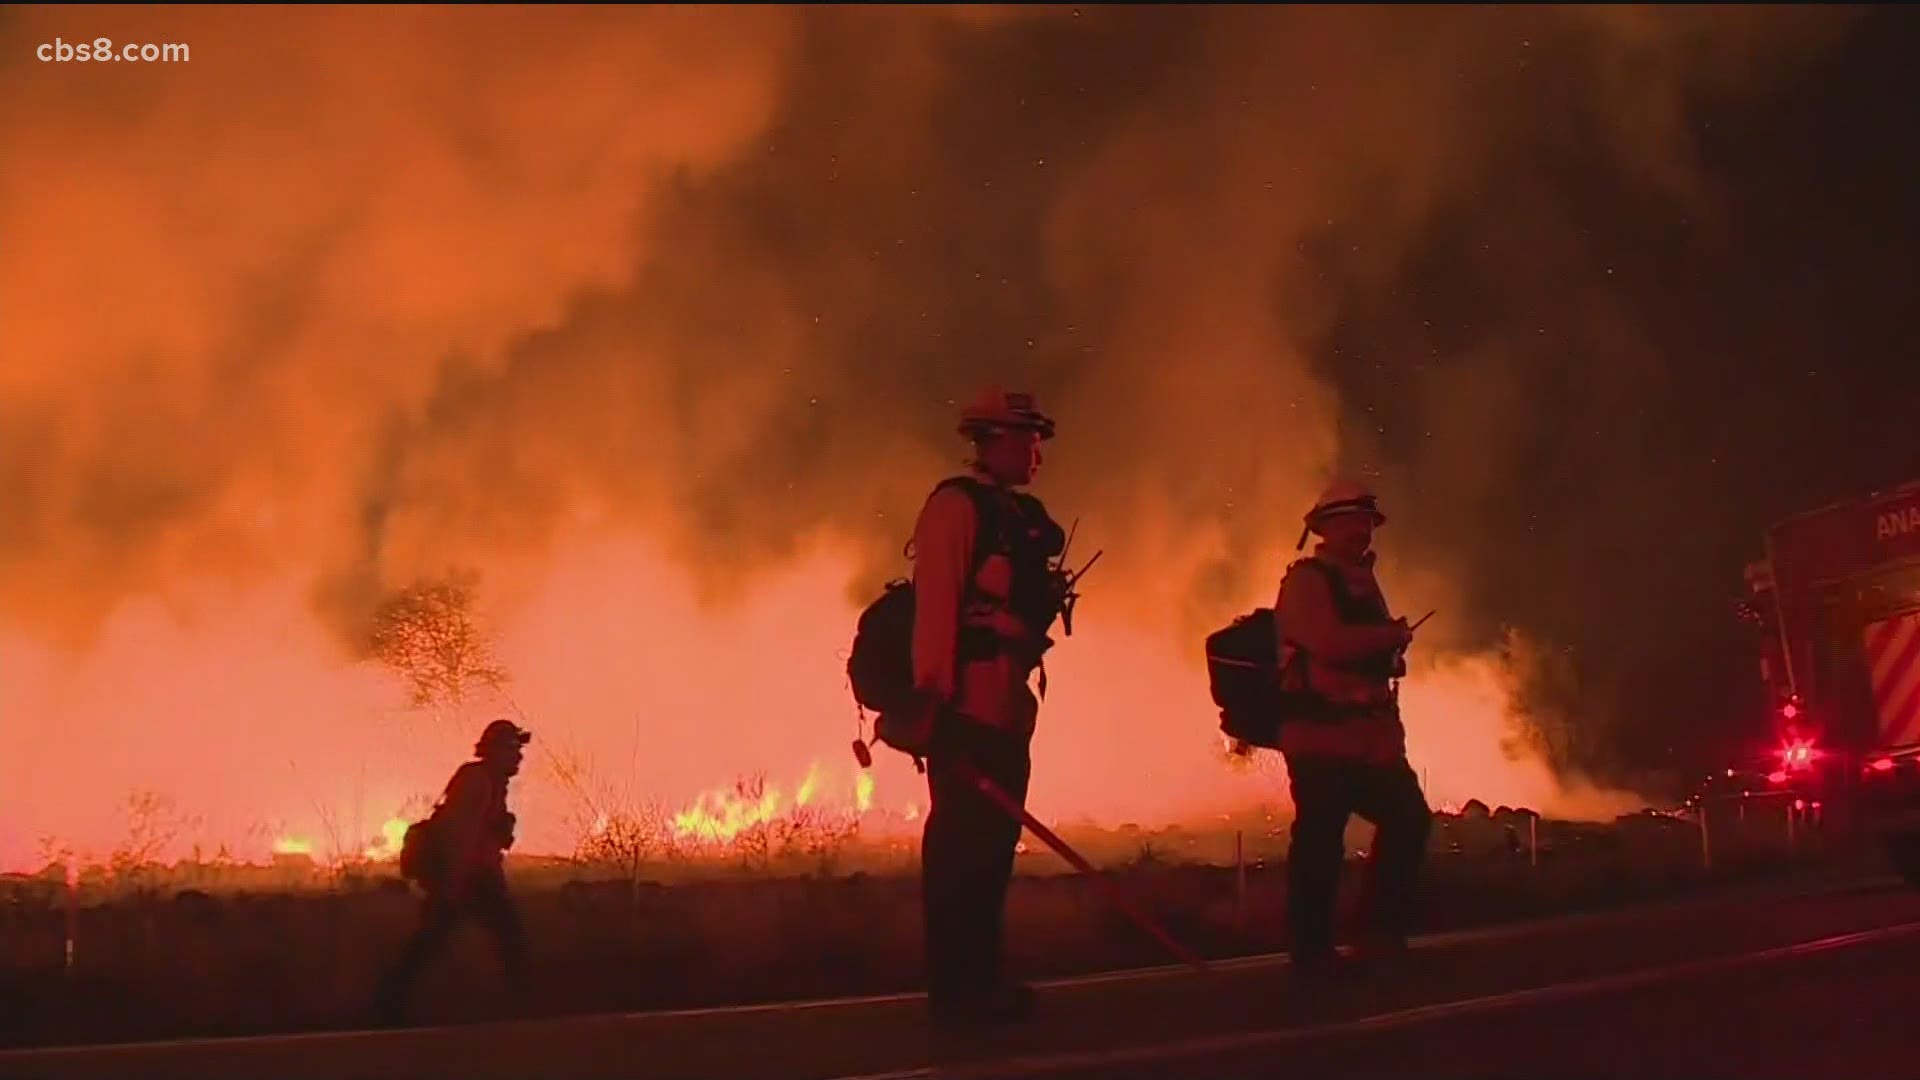 This year has seen one of the worst fire seasons on record and crews are stretched thin moving from fire to fire.